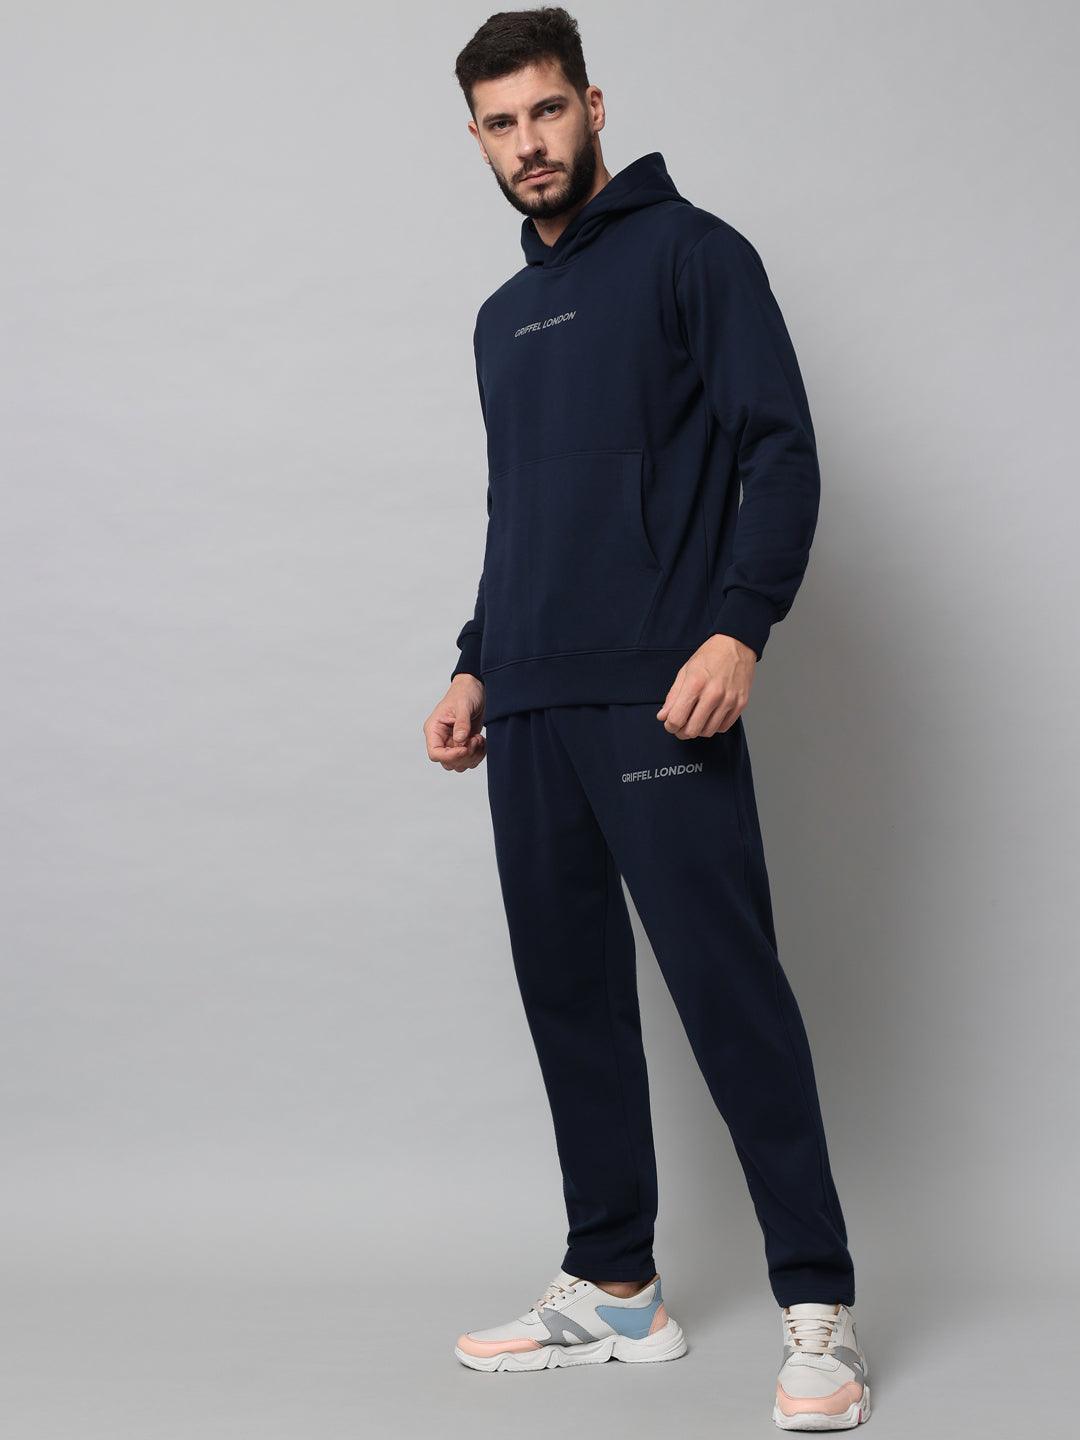 Griffel Men's Front Logo Solid Fleece Basic Hoodie and Joggers Full set Navy Tracksuit - griffel